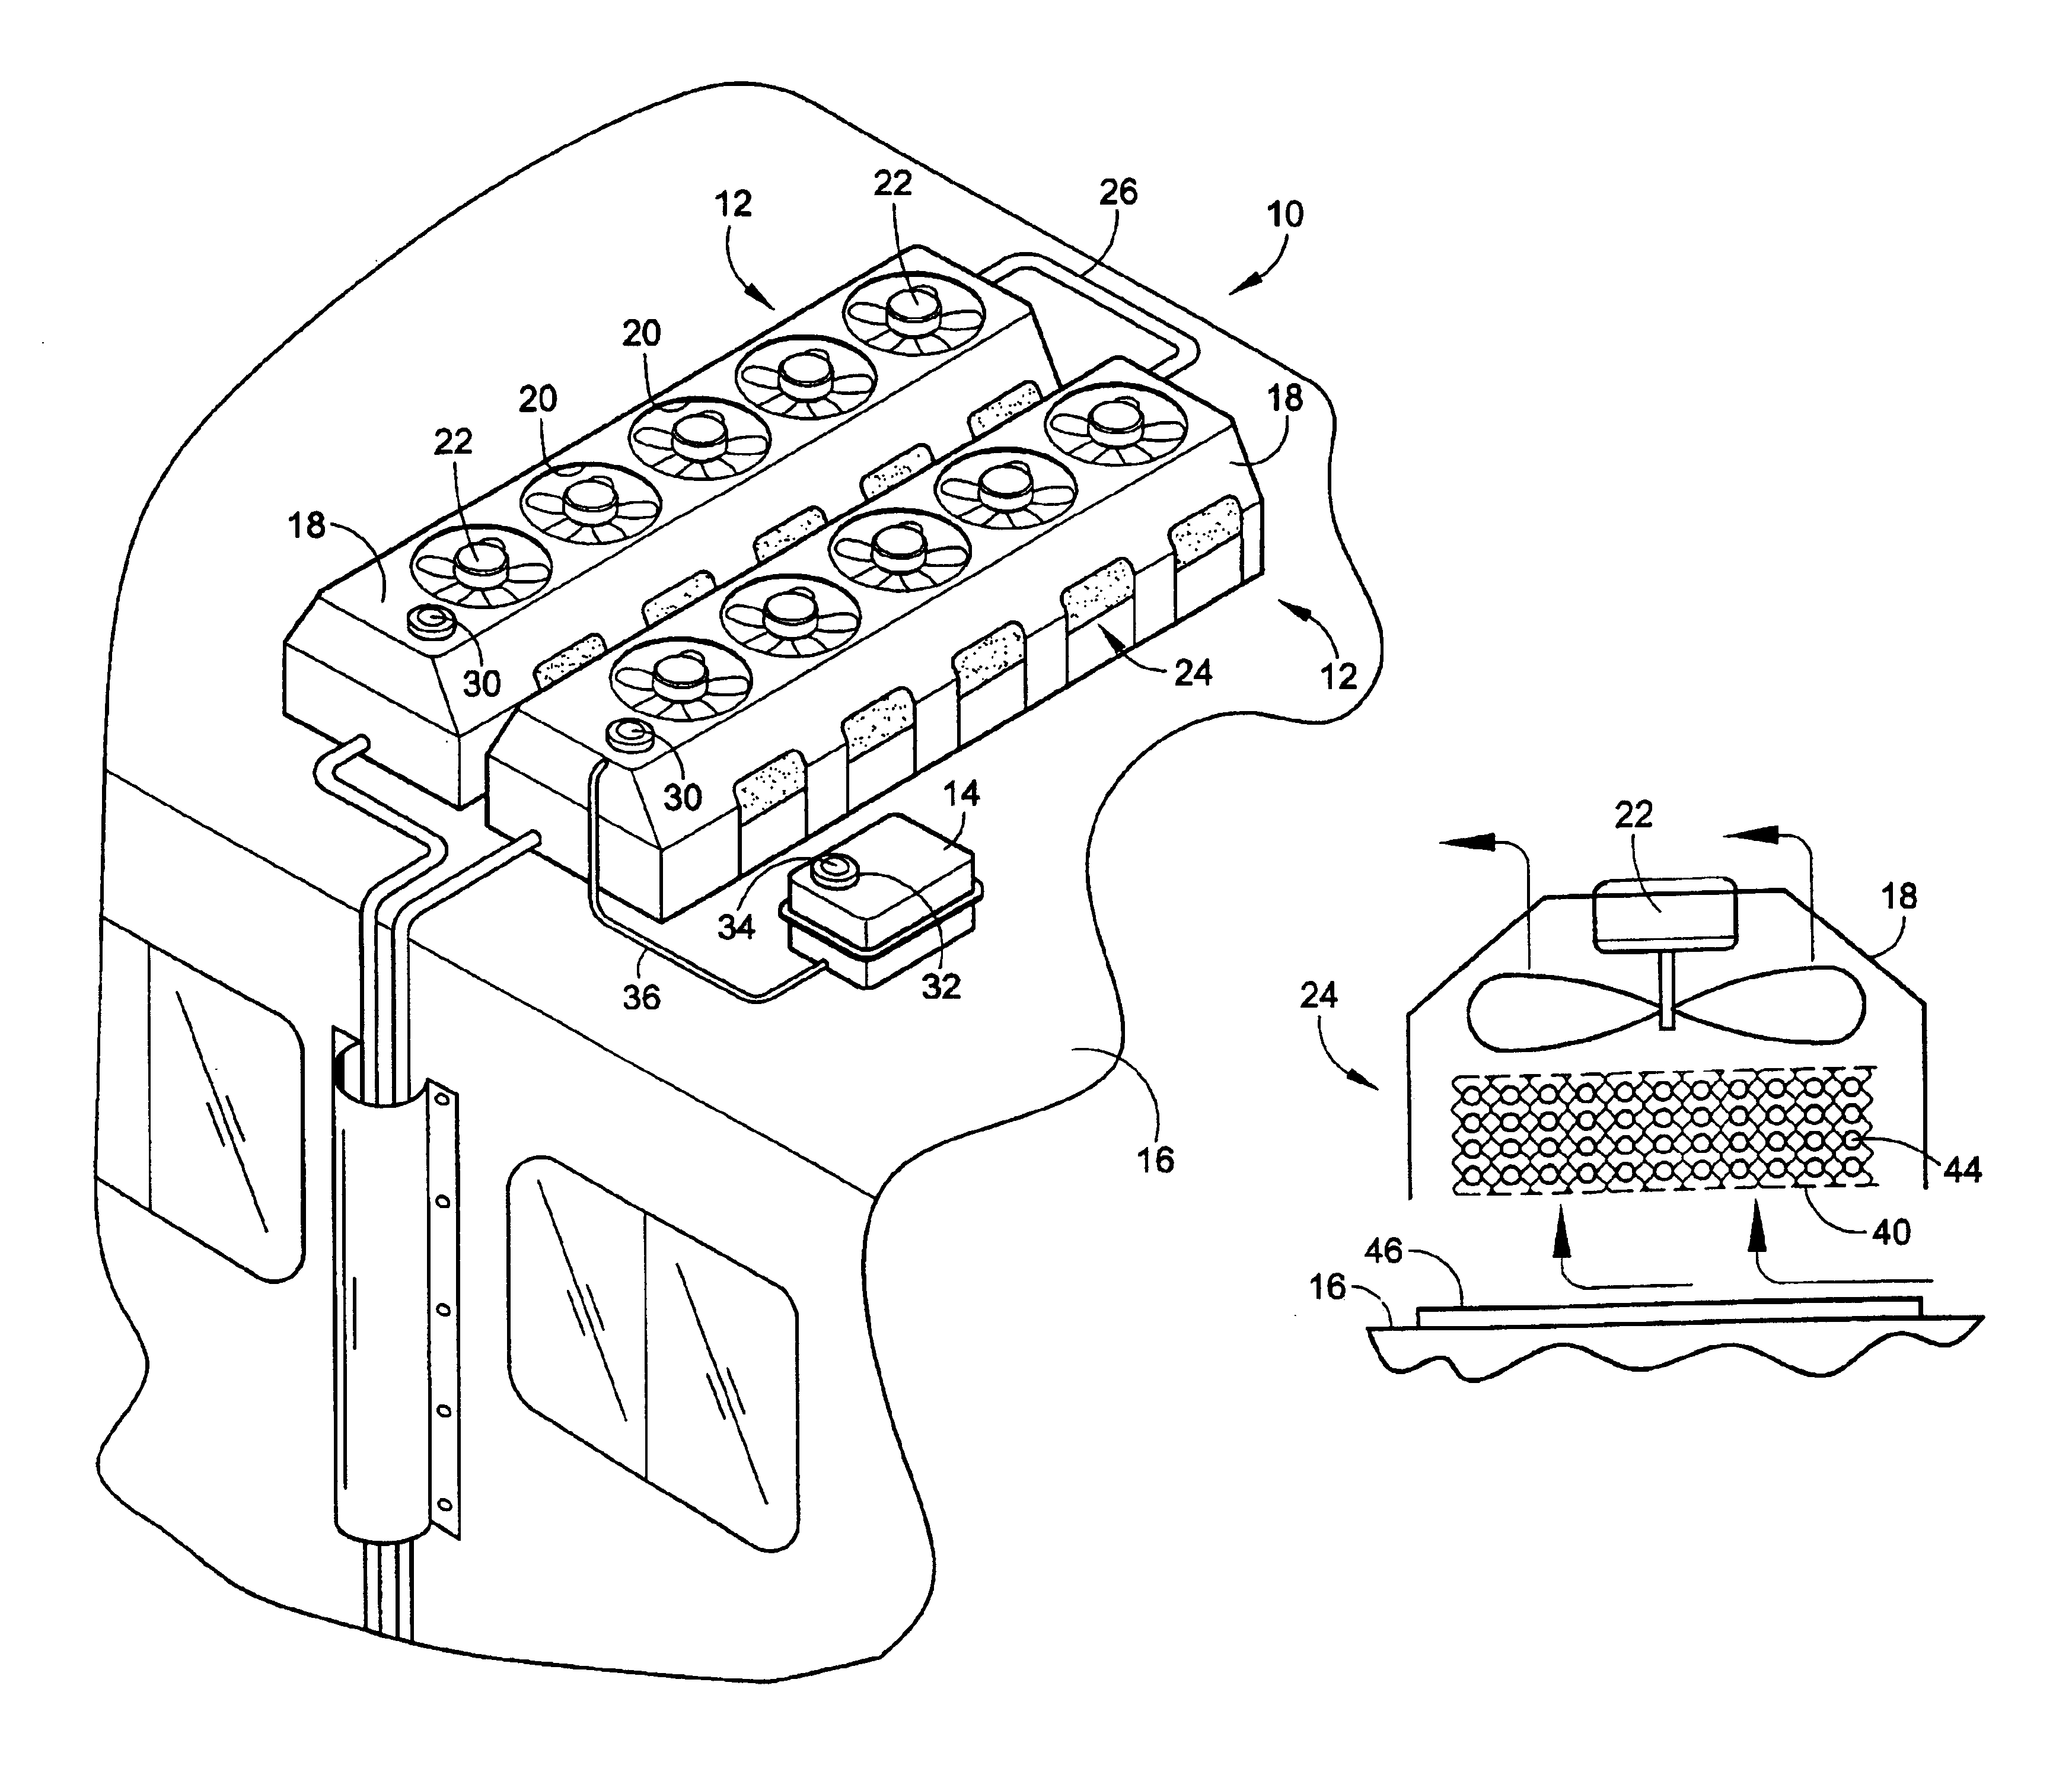 Vehicle rooftop engine cooling system